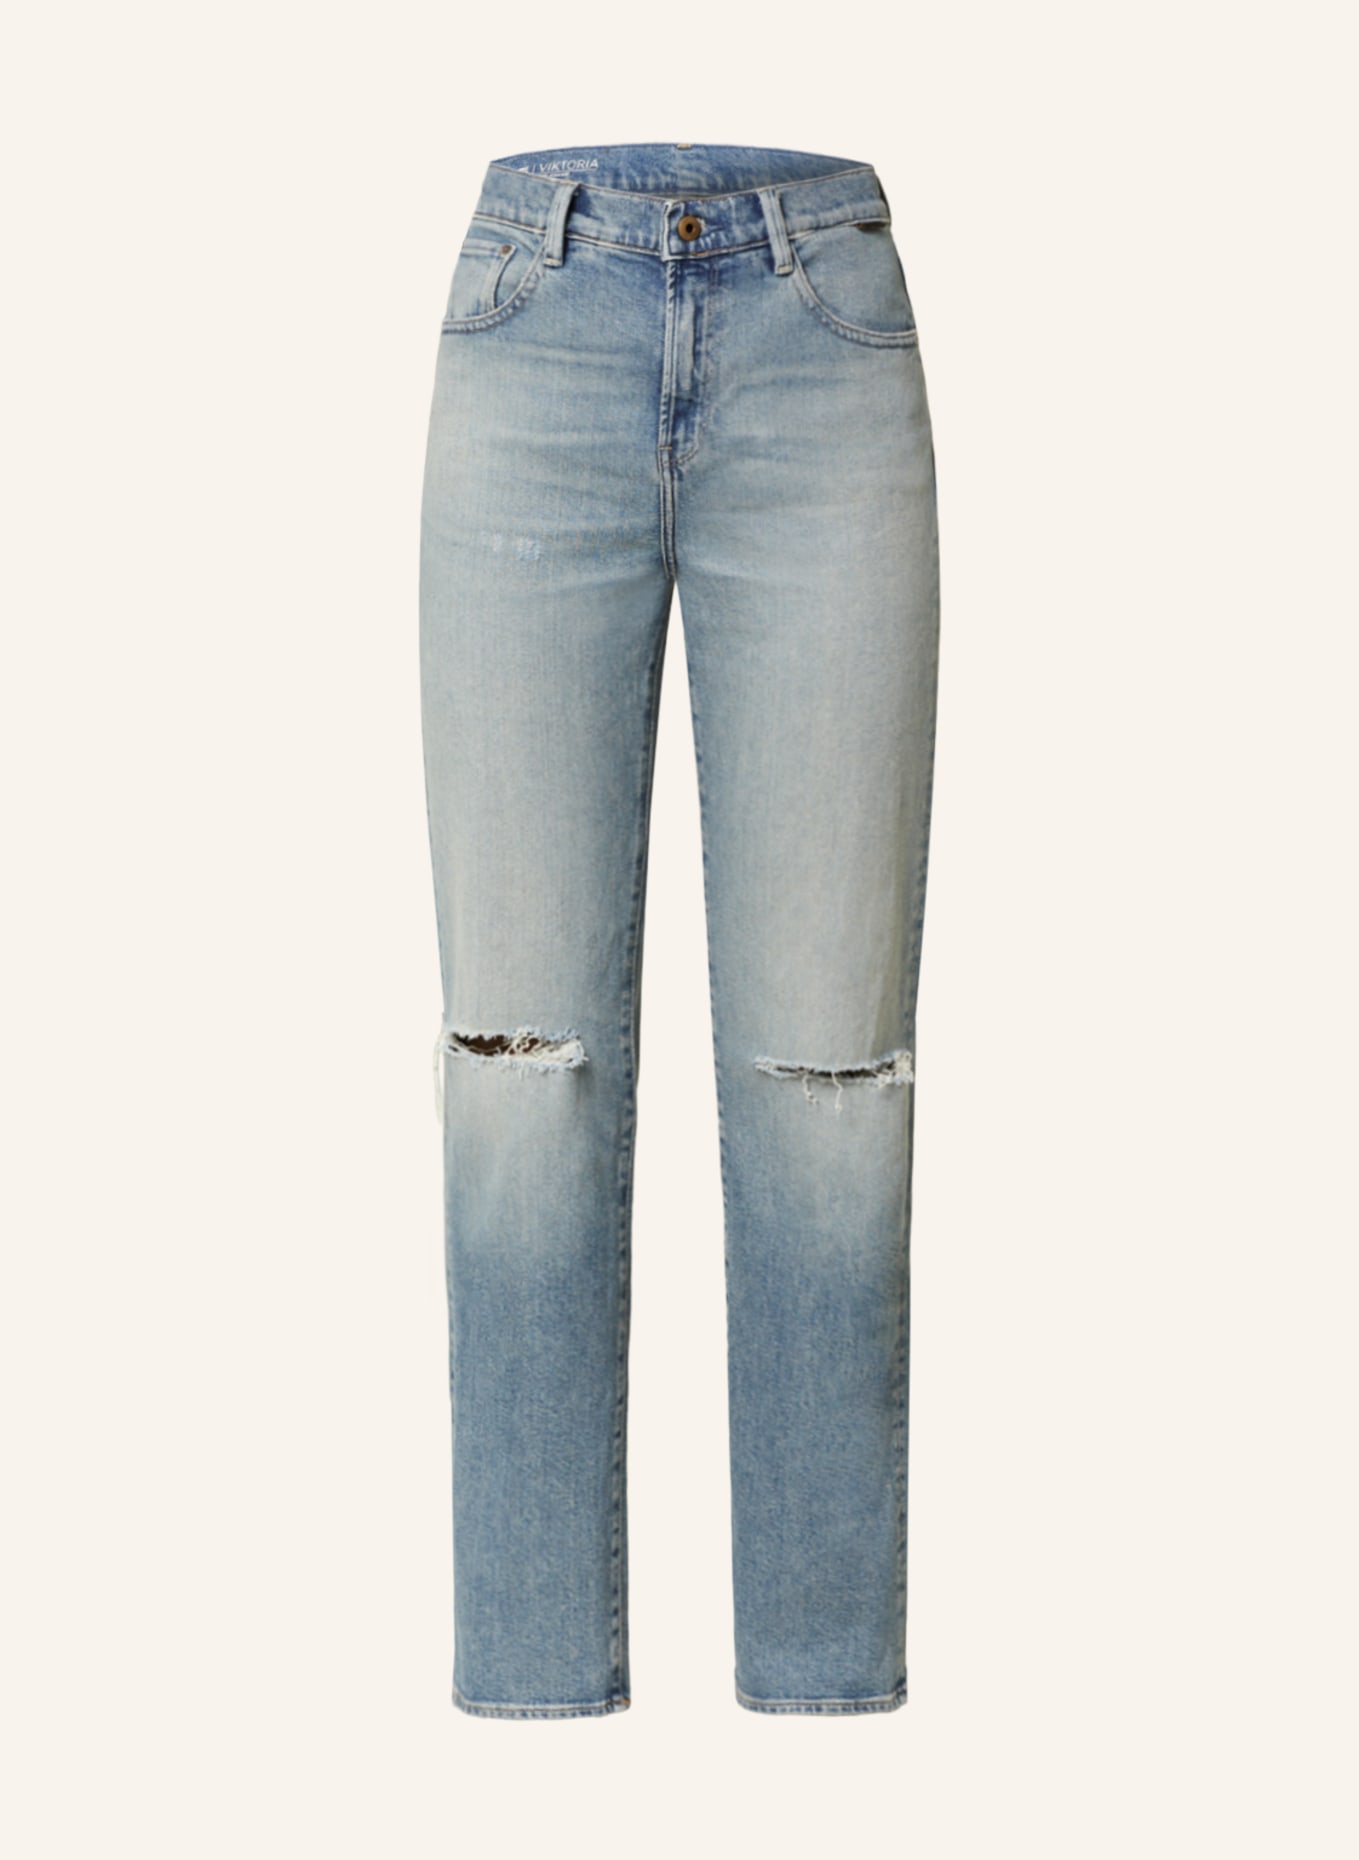 G-Star RAW Straight Jeans VIKTORIA, Farbe: G130 antique faded blue agave ripped (Bild 1)